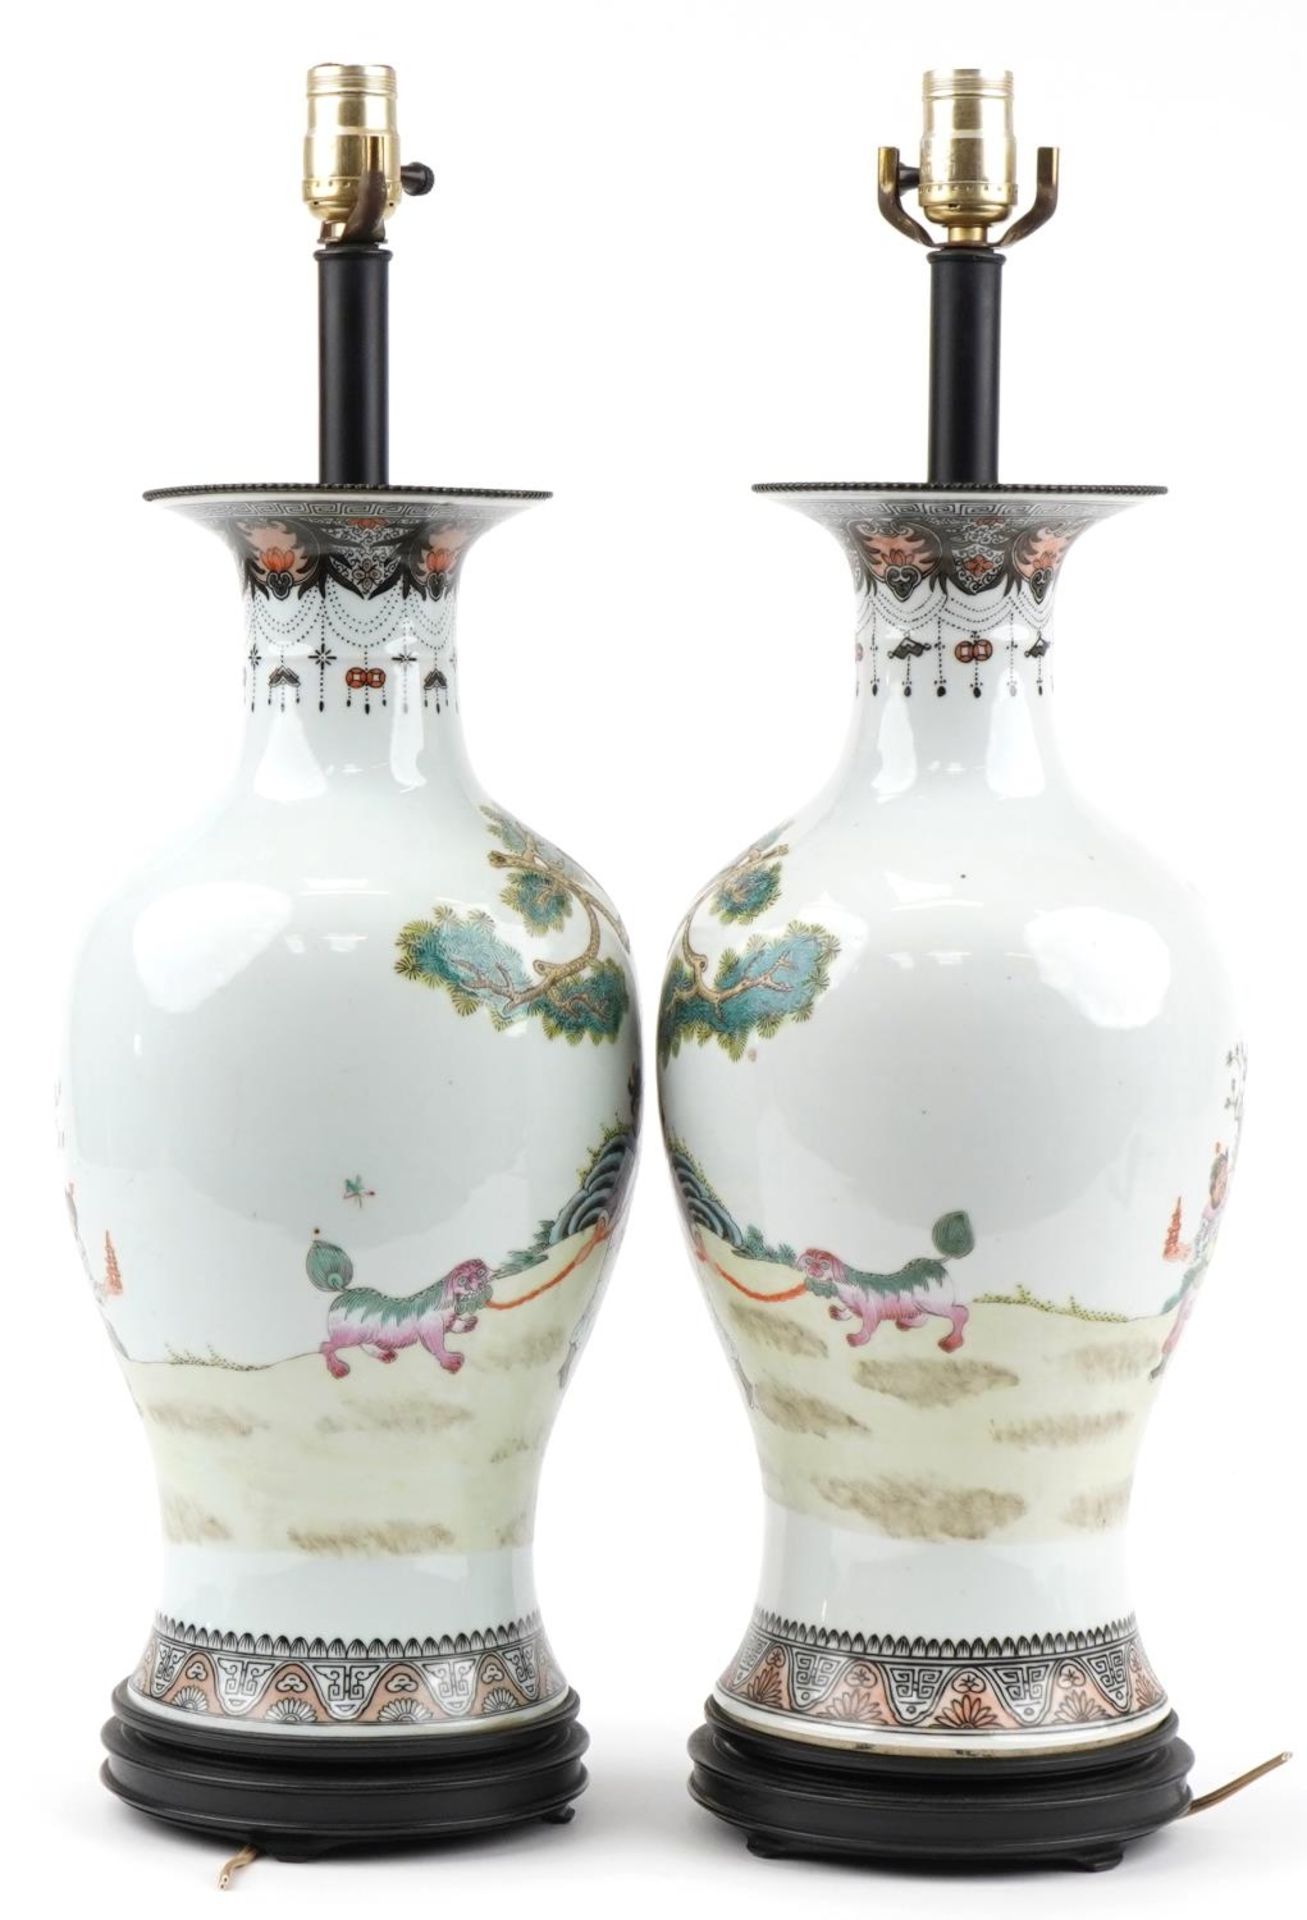 Pair of Chinese porcelain baluster vase table lamps raised on hardwood stands, each hand painted - Image 2 of 3